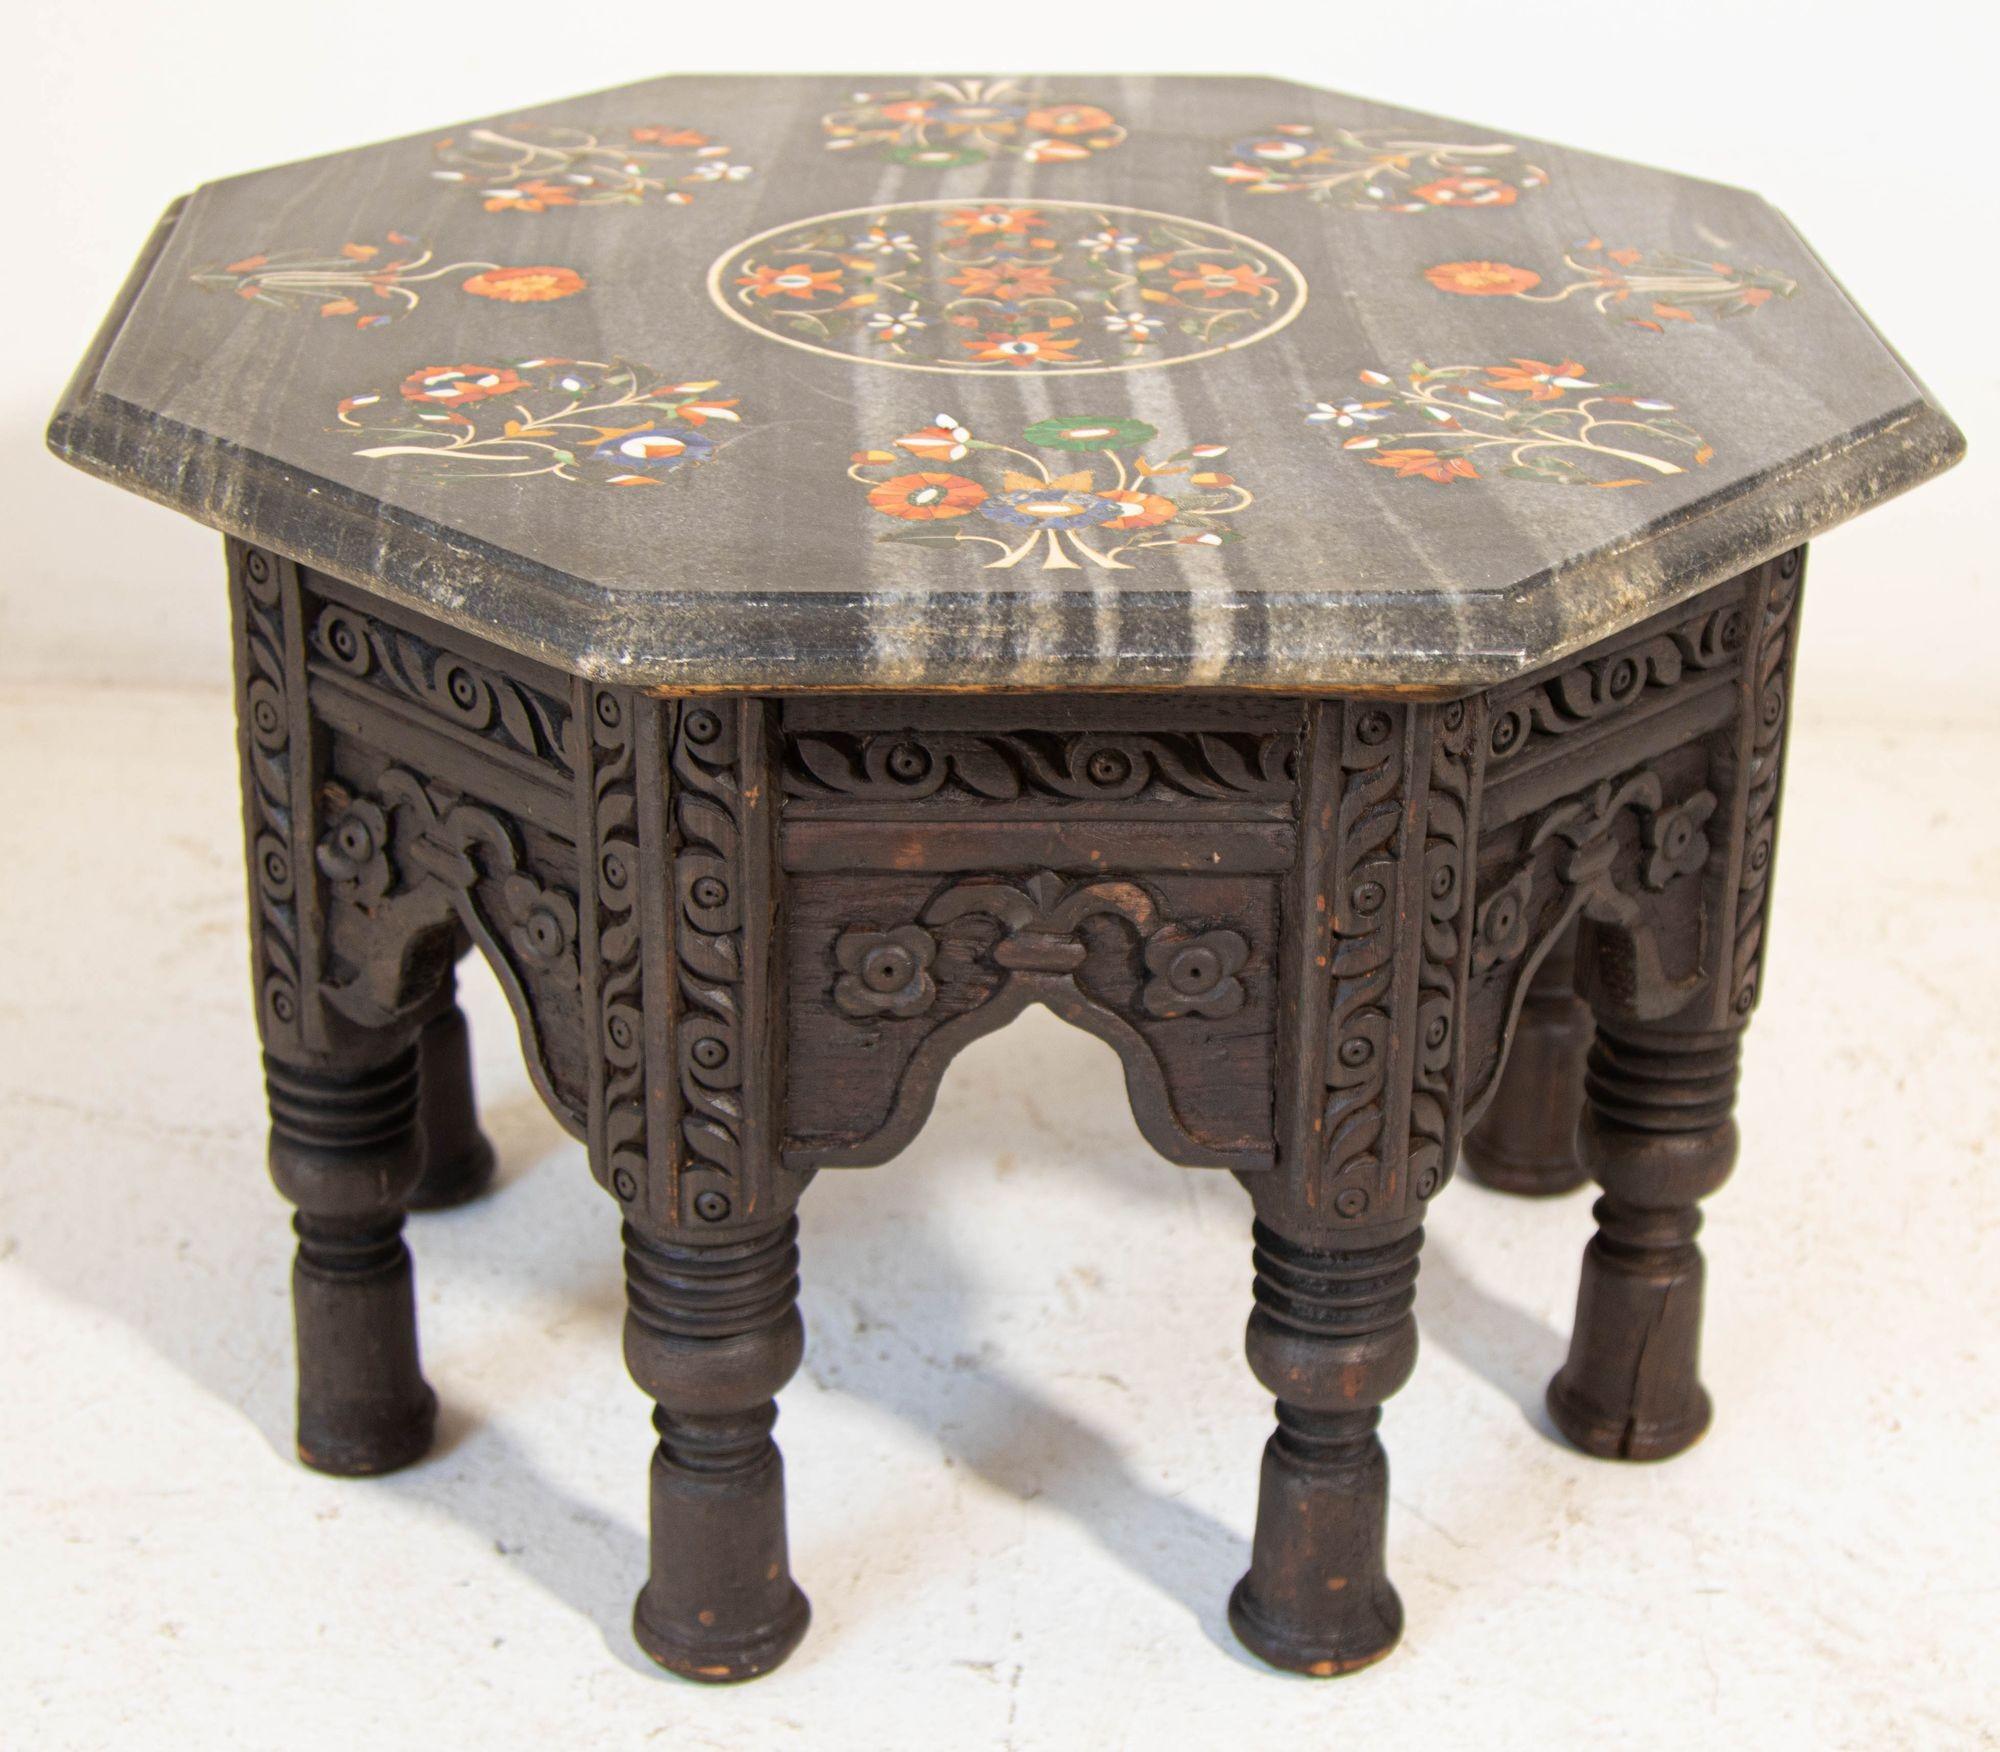 Indian Pietra Dura Mosaic Octagonal Top Side Marble Inlaid Table Agra India For Sale